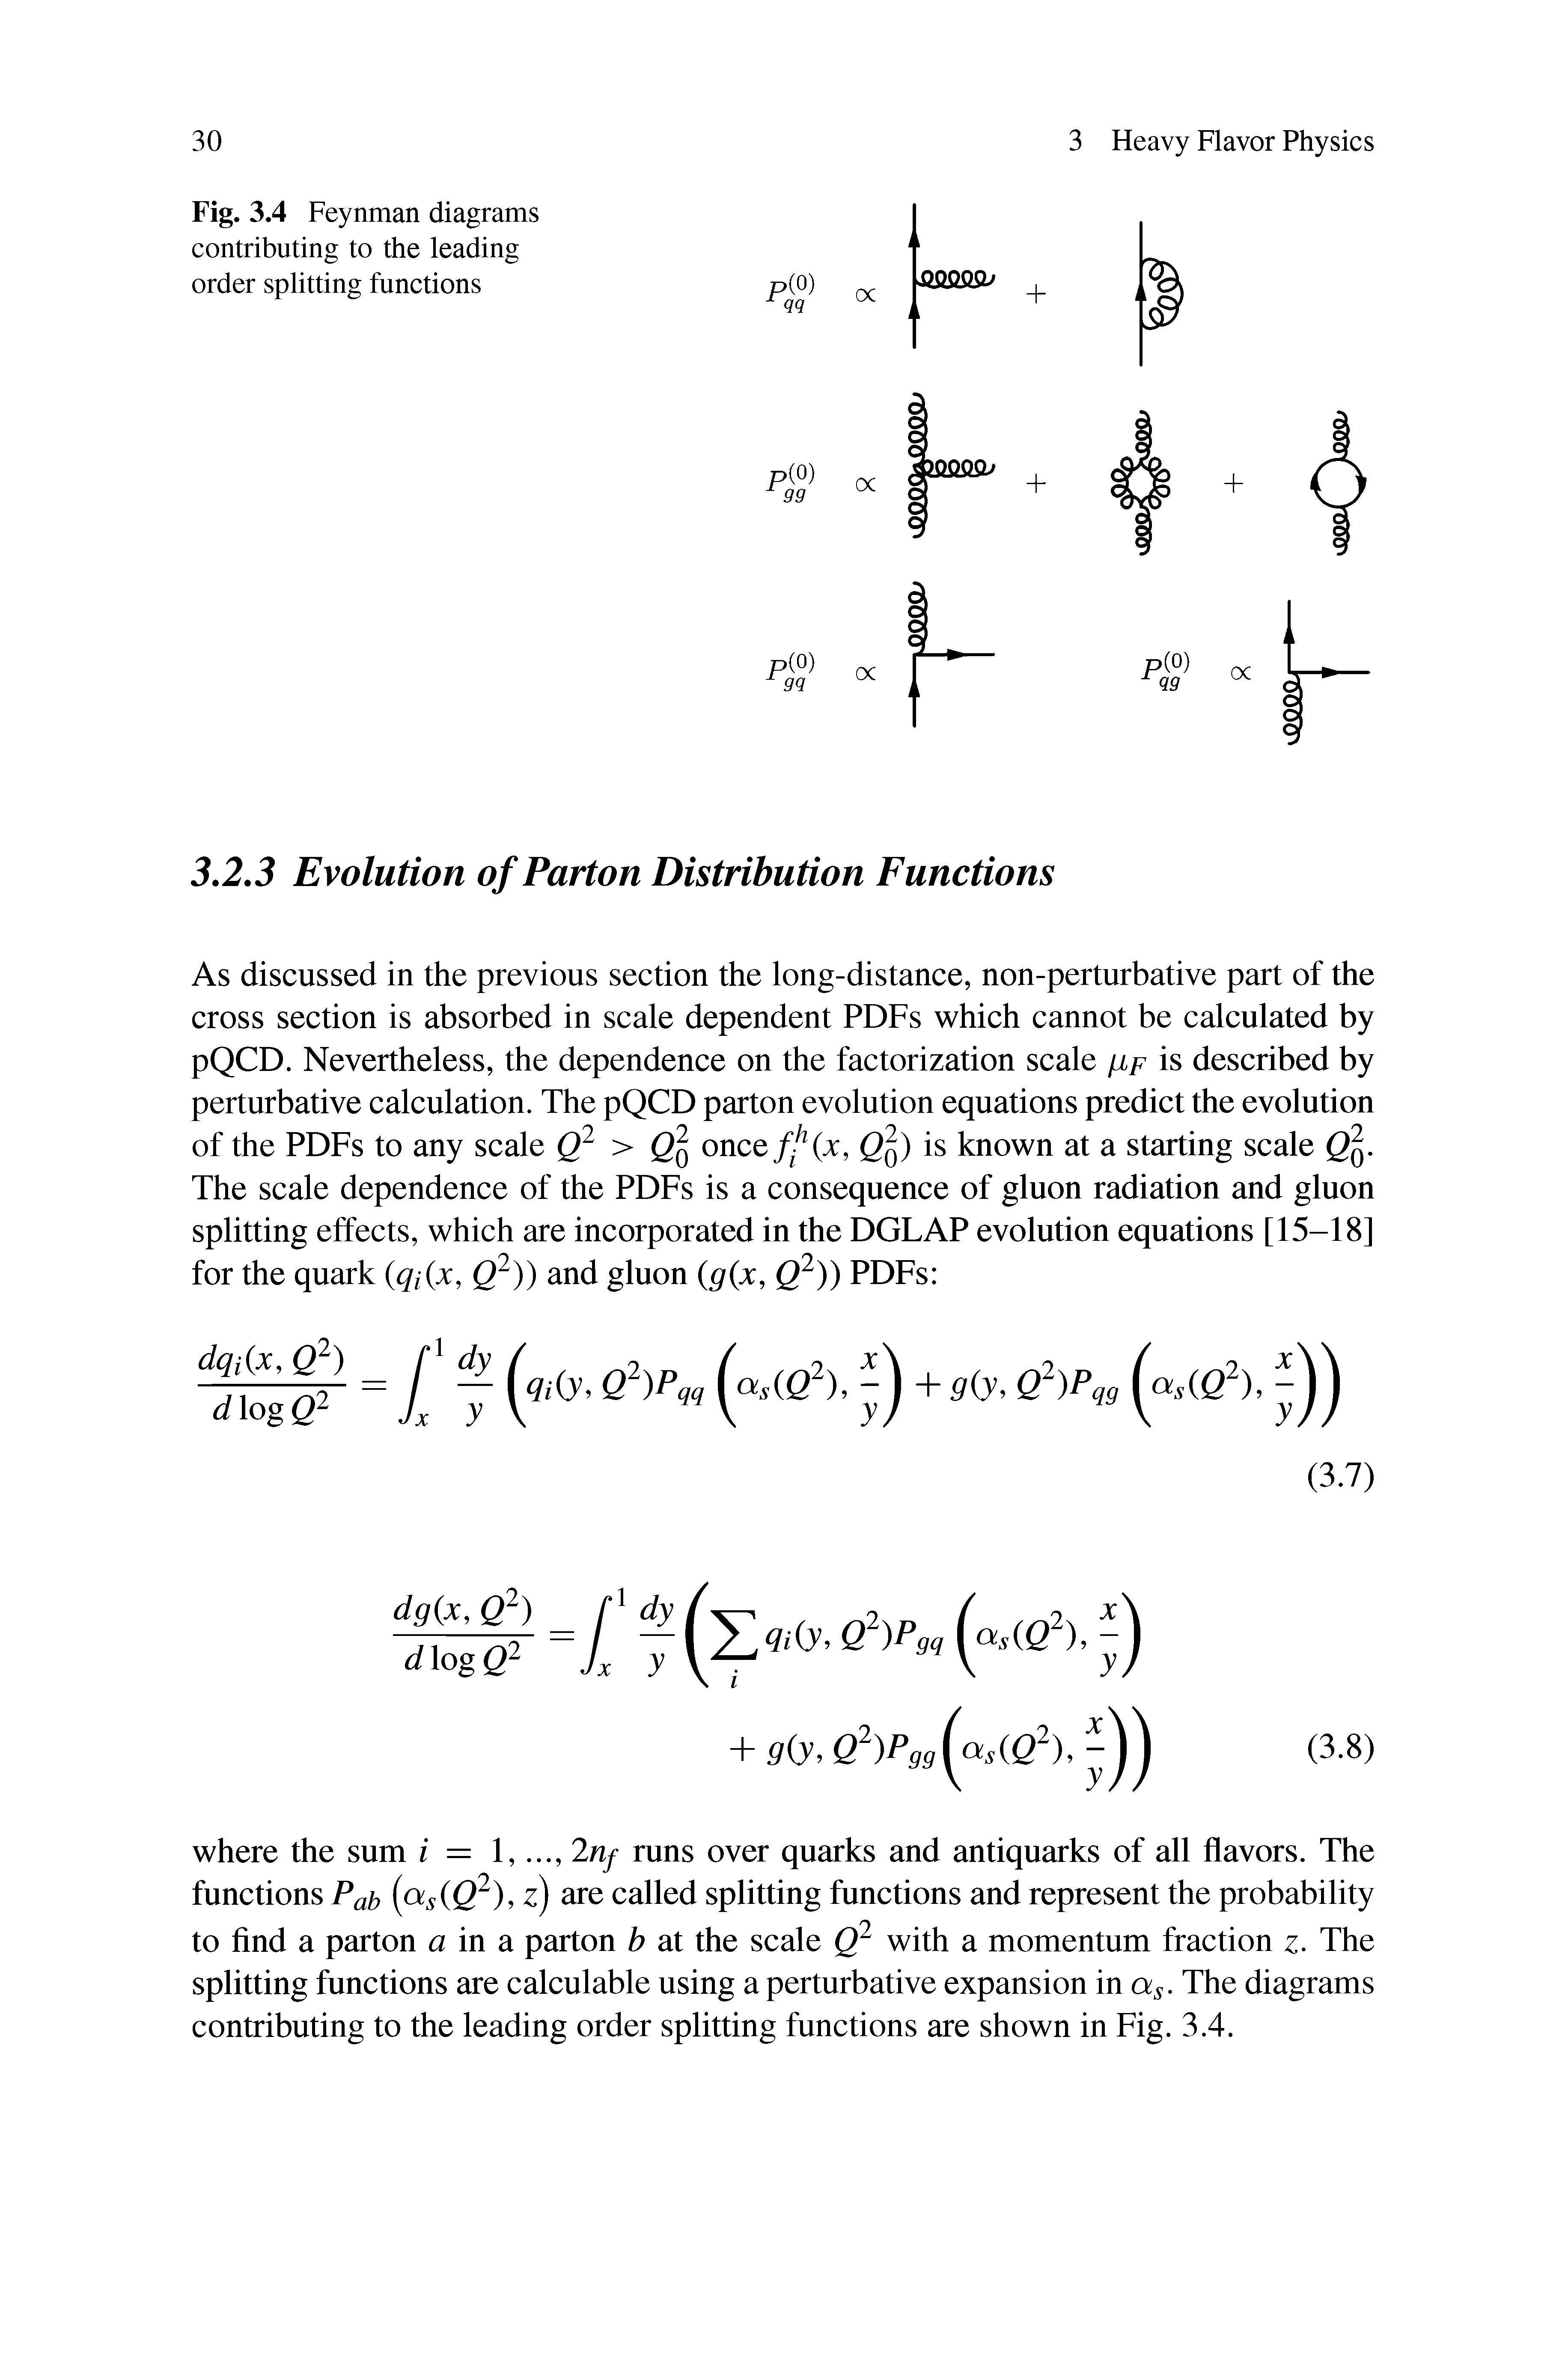 Fig. 3.4 Feynman diagrams contributing to the leading order splitting functions...